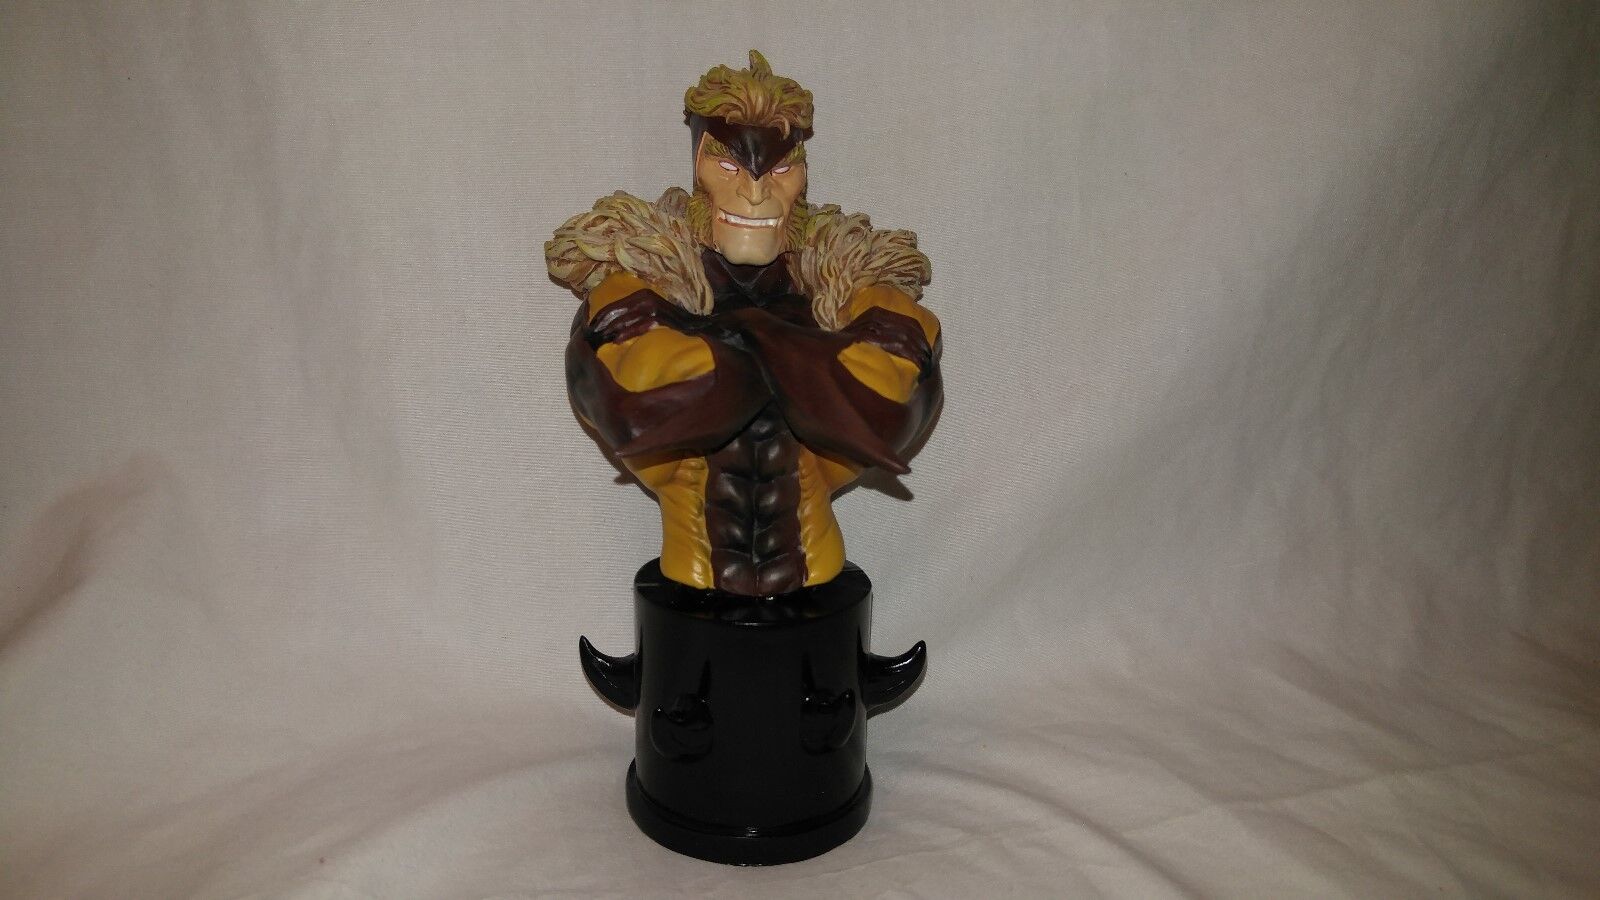 Sabretooth Mini Bust By Bowen Designs Sculpted By Randy Bowen